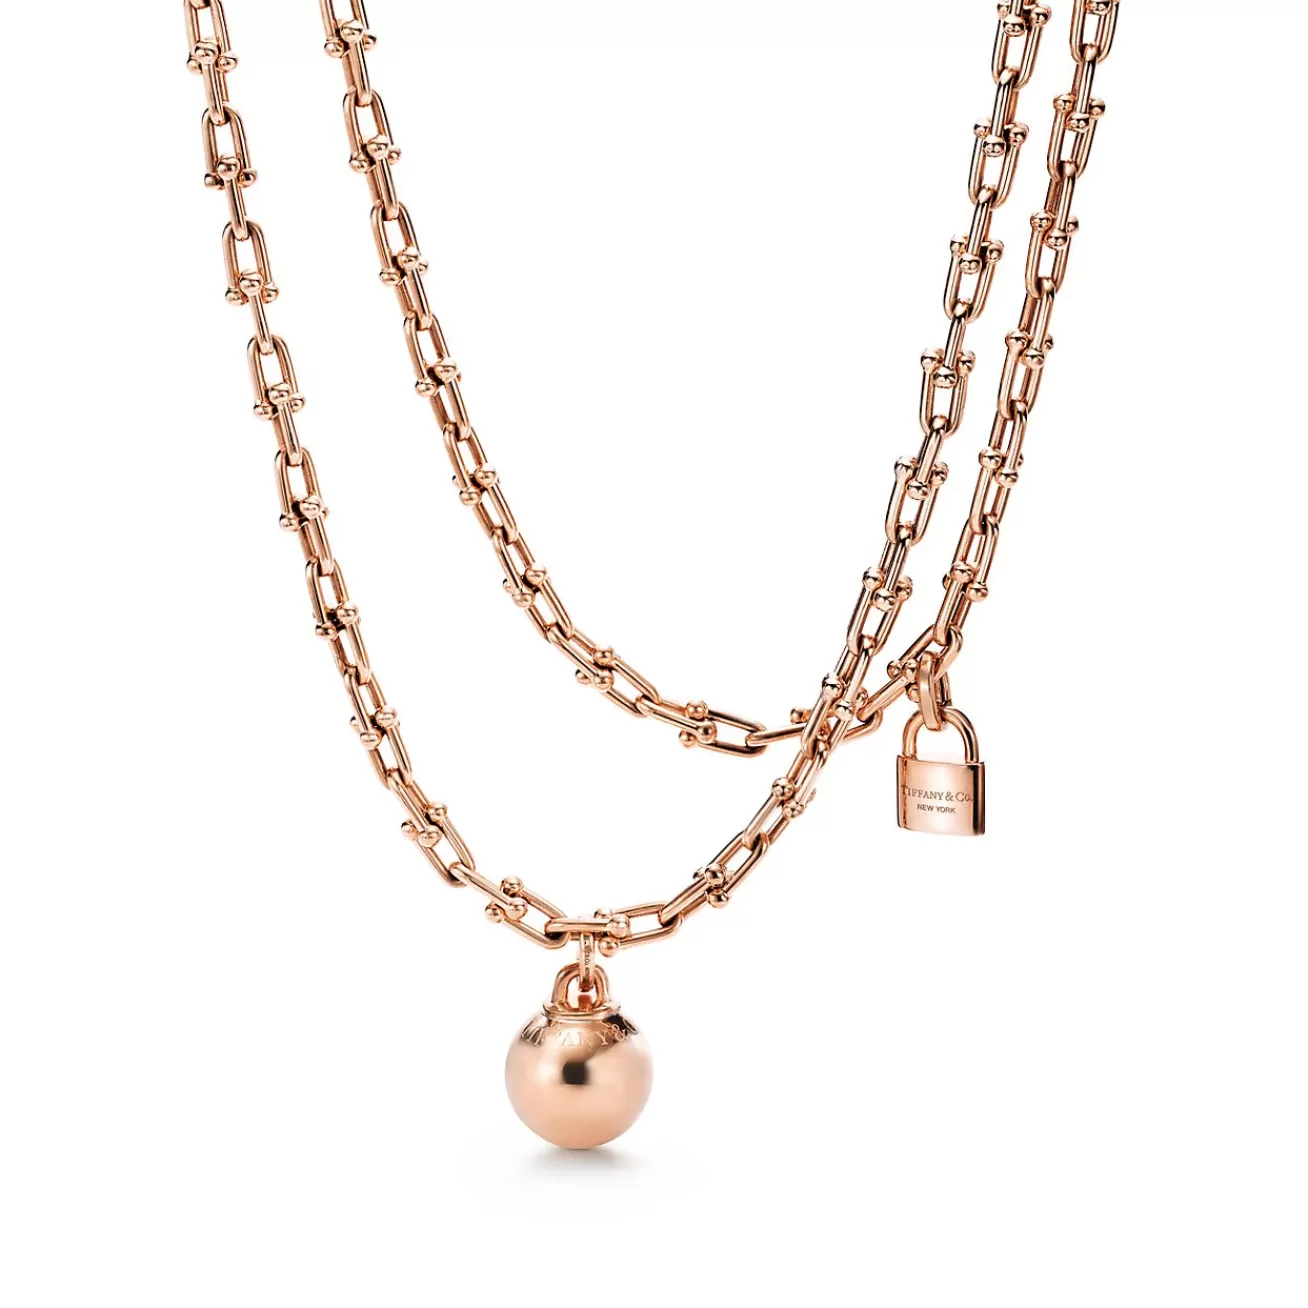 Tiffany & Co. Tiffany HardWear Small Wrap Necklace in Rose Gold | ^ Necklaces & Pendants | Men's Jewelry